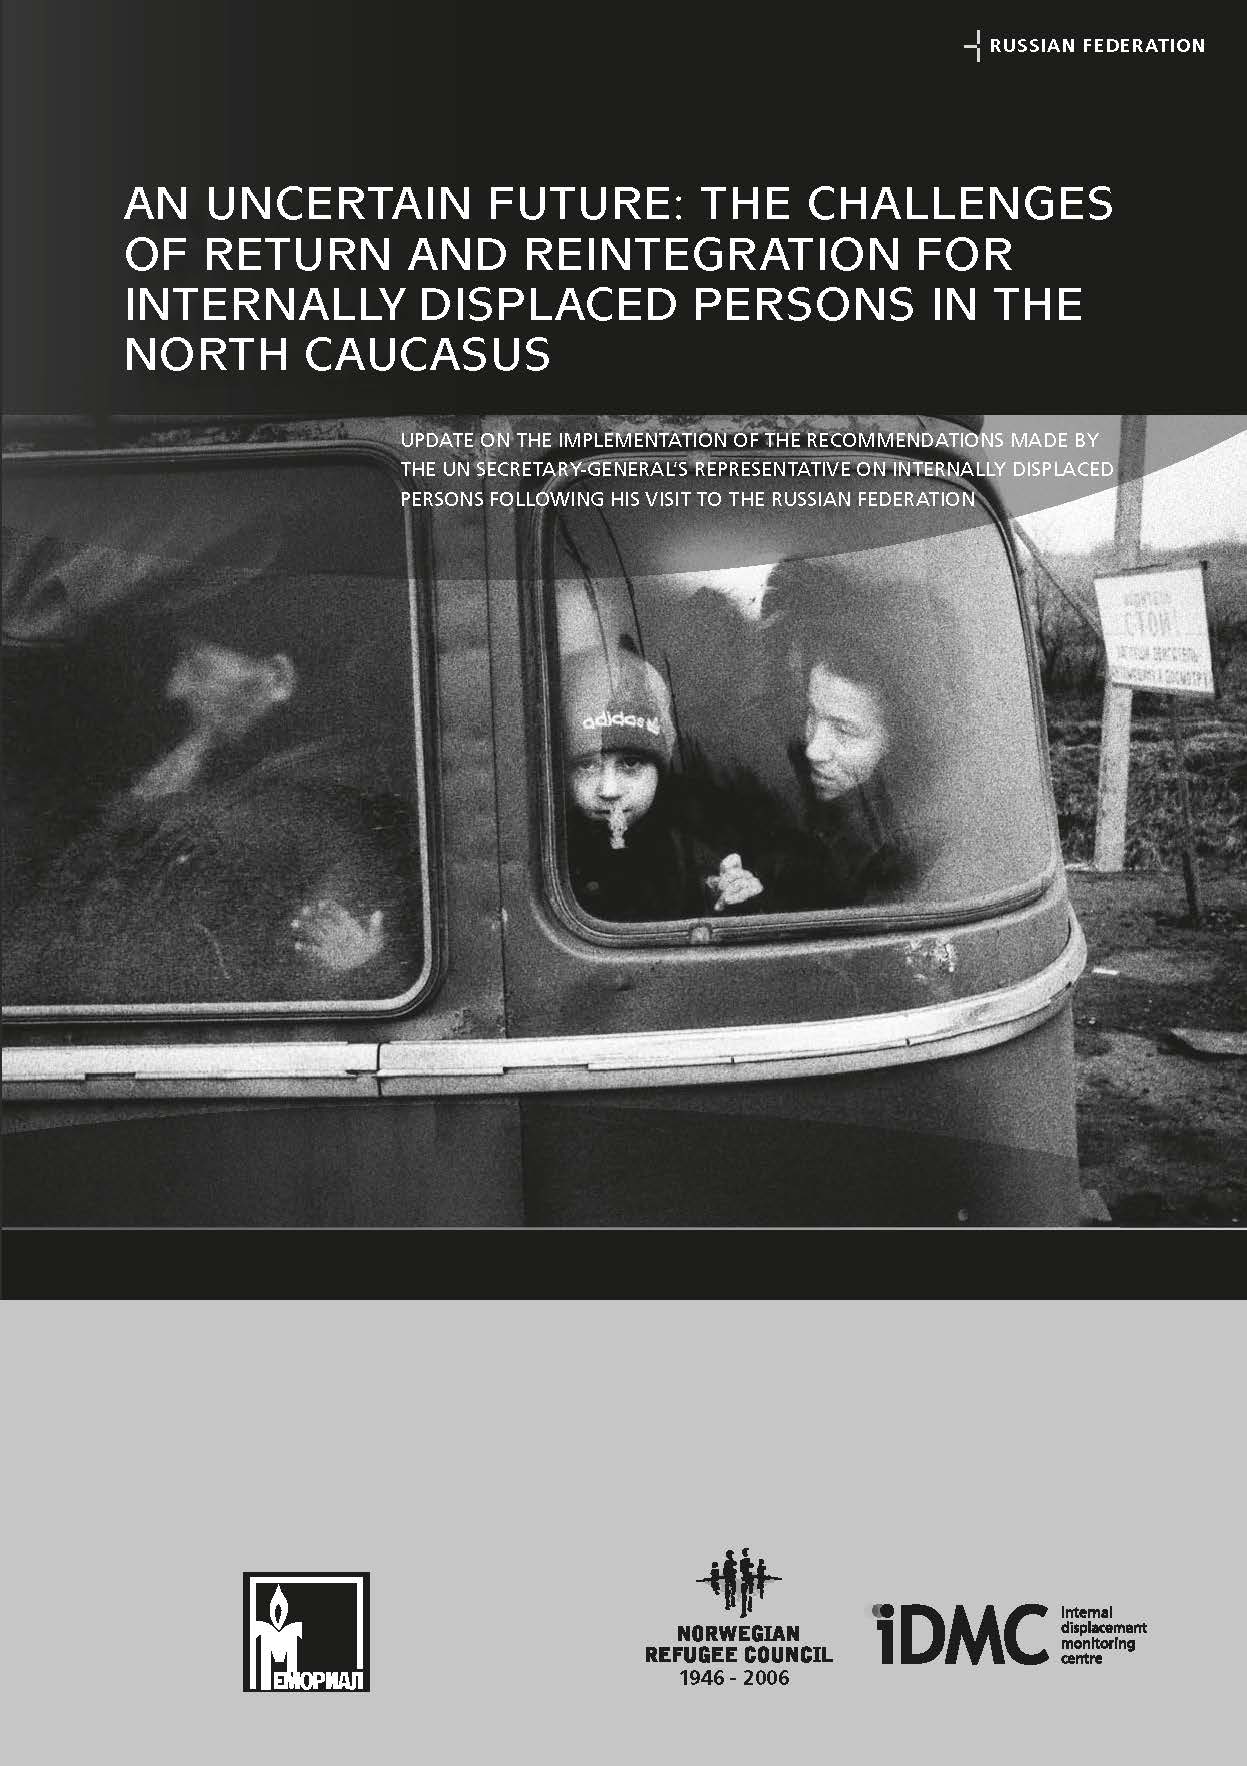 An Uncertain Future: The Challenges of Return and Reintegration for Internally Displaced Persons in the North Caucasus